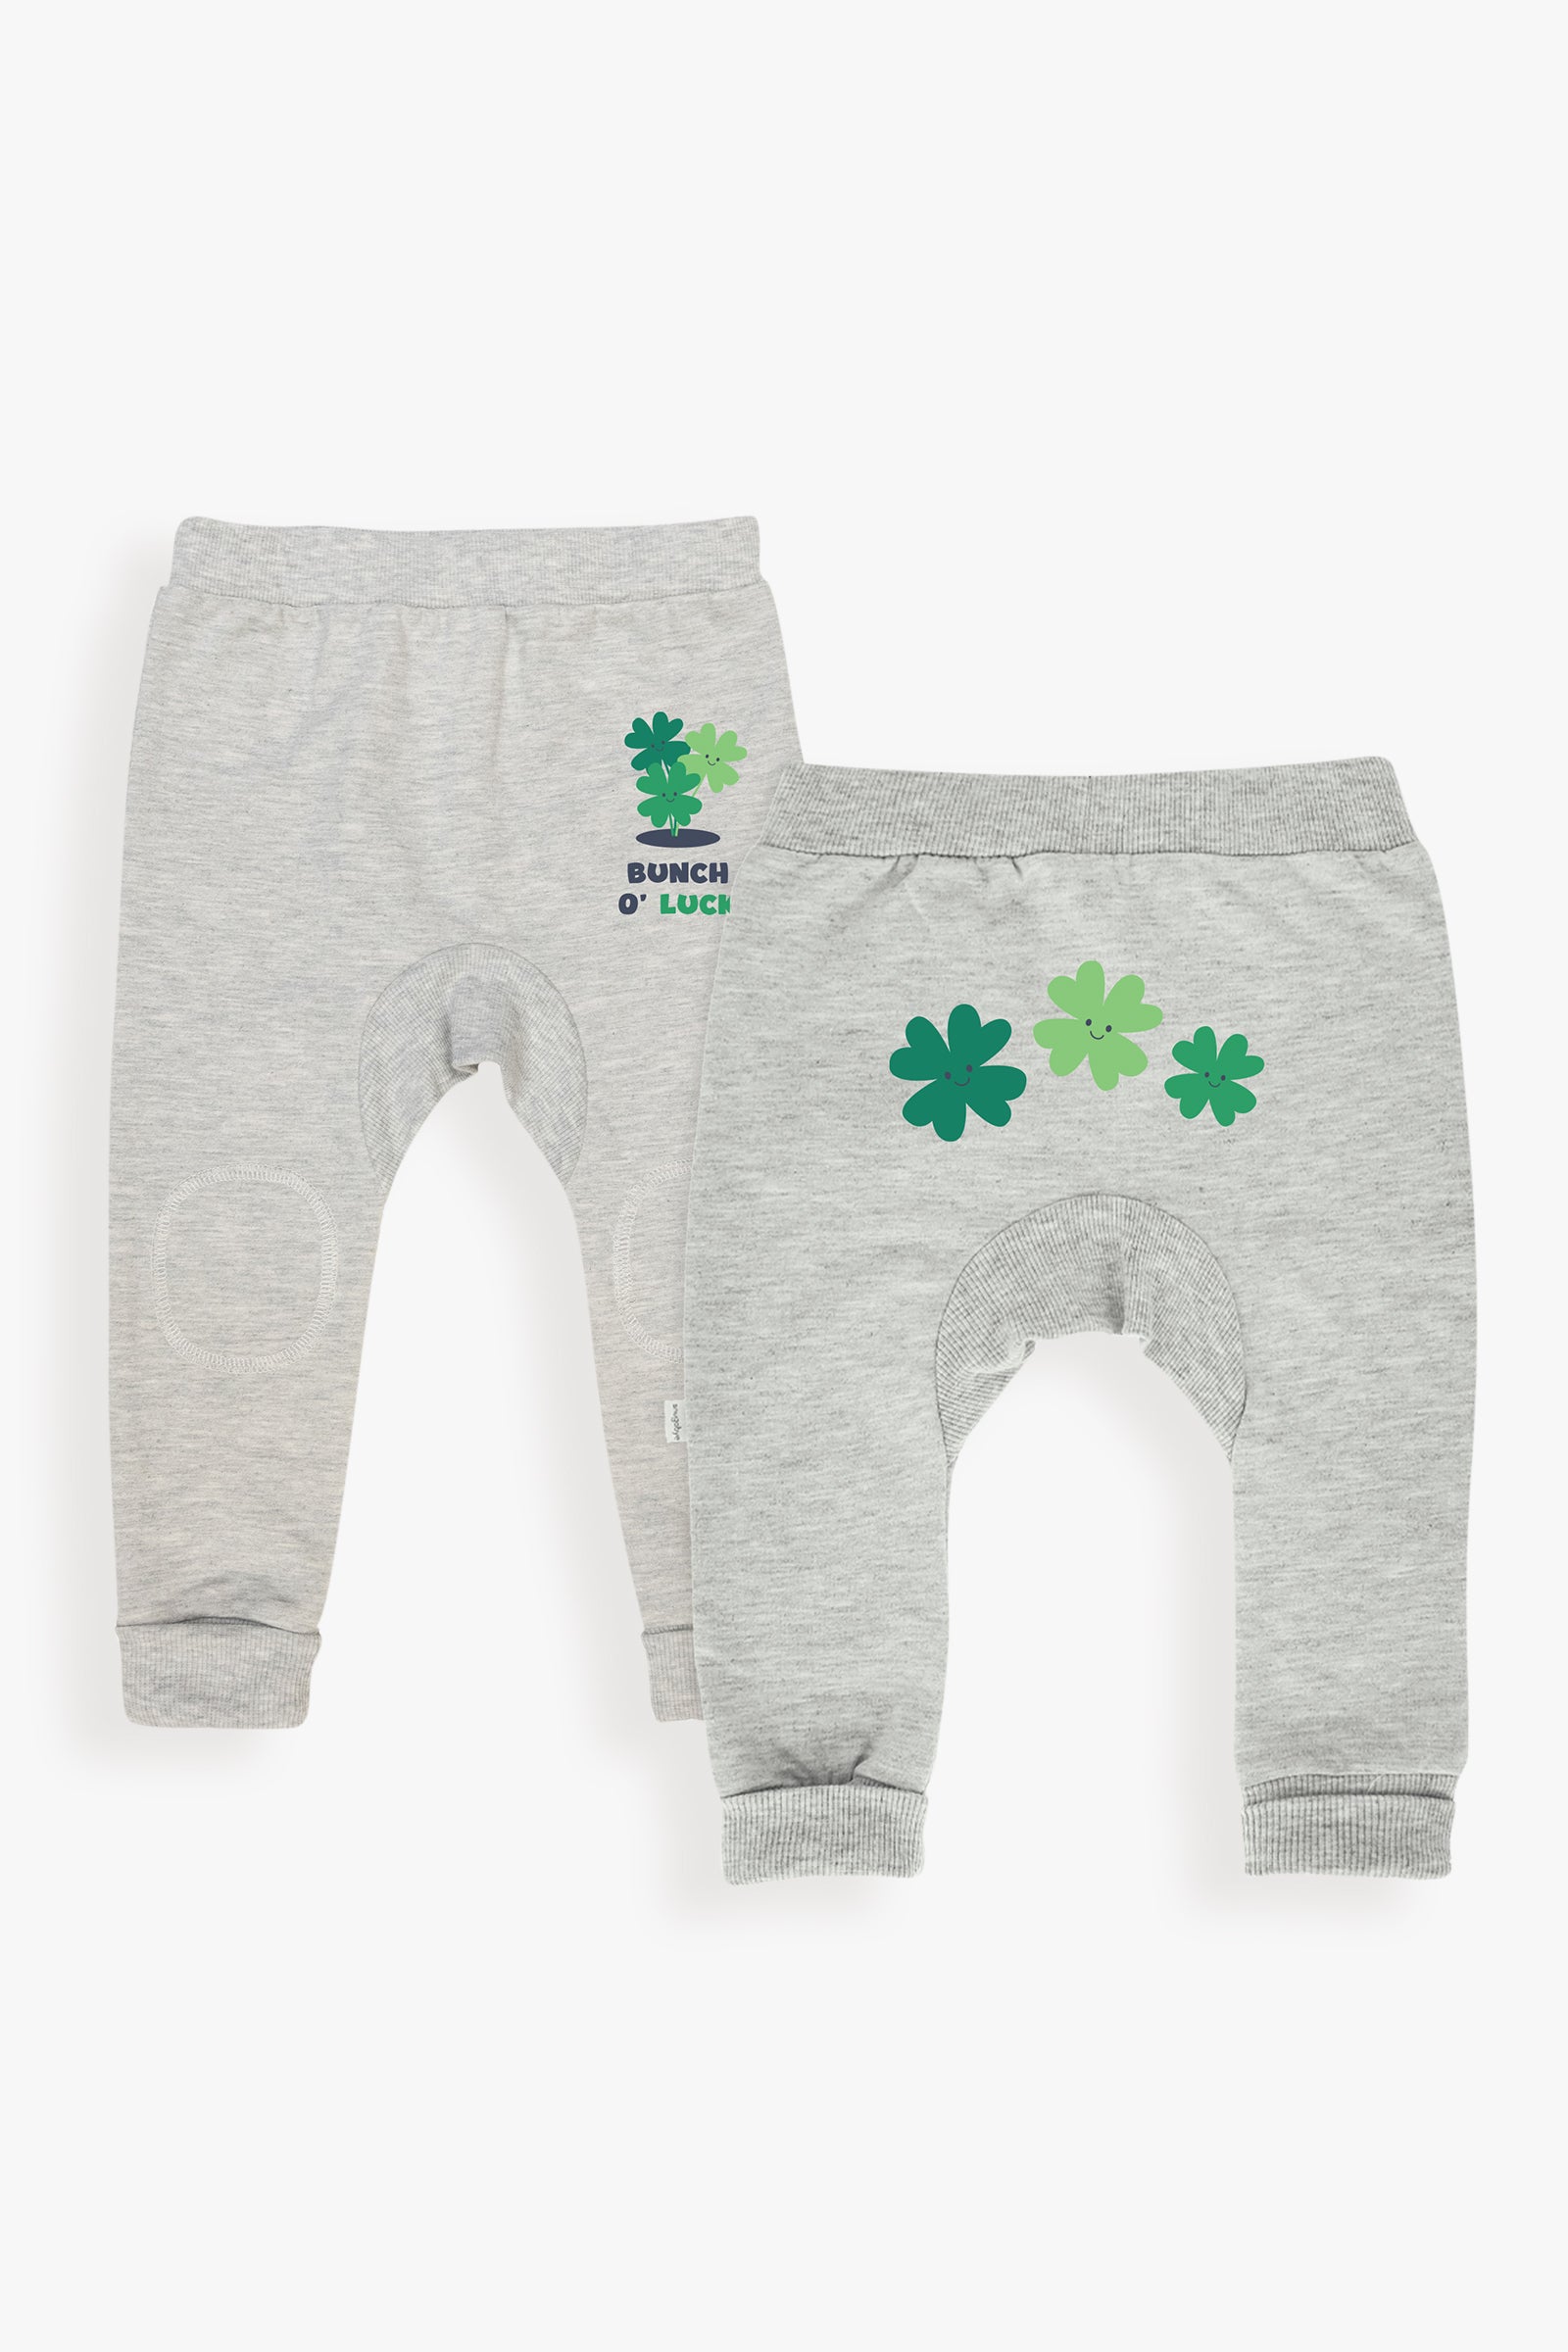 St. Patrick's Day Irish Holiday Celebration Baby & Toddler French Terry Pants